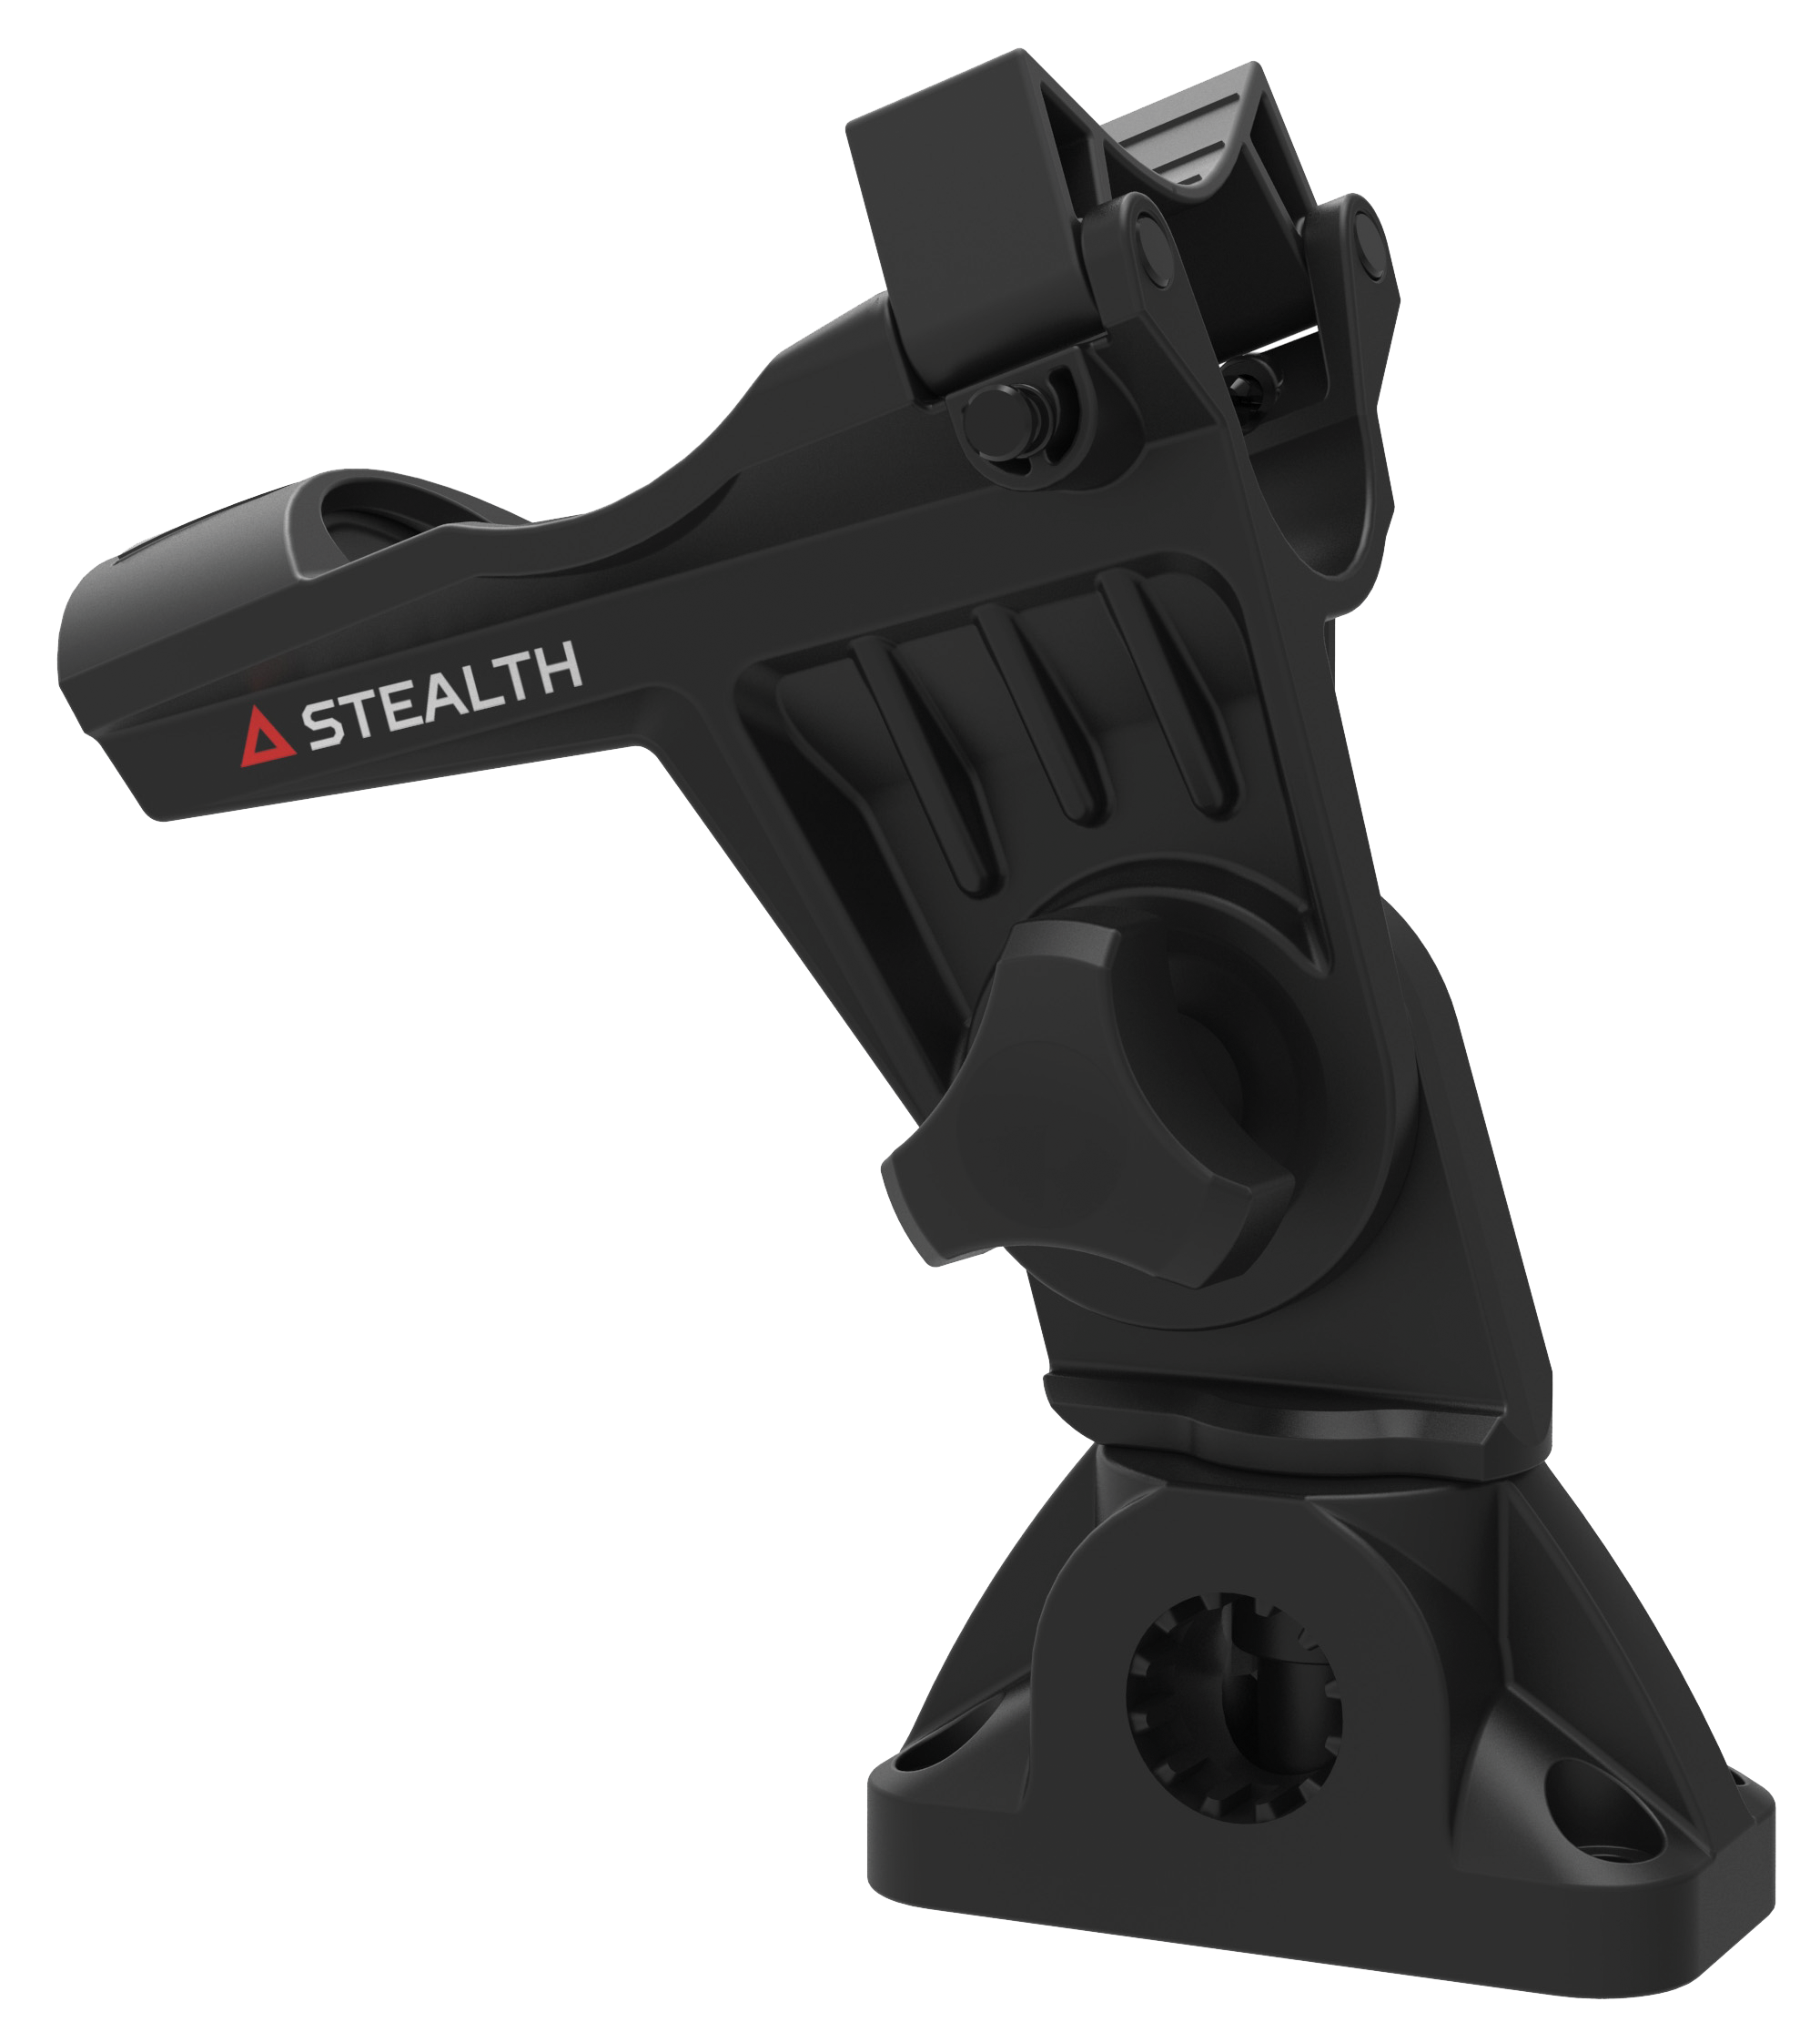 Mounts, Tracks & Accessories: QR - 2 Quick Release Rod Holder by Stealth Rod Holders - Image 4720